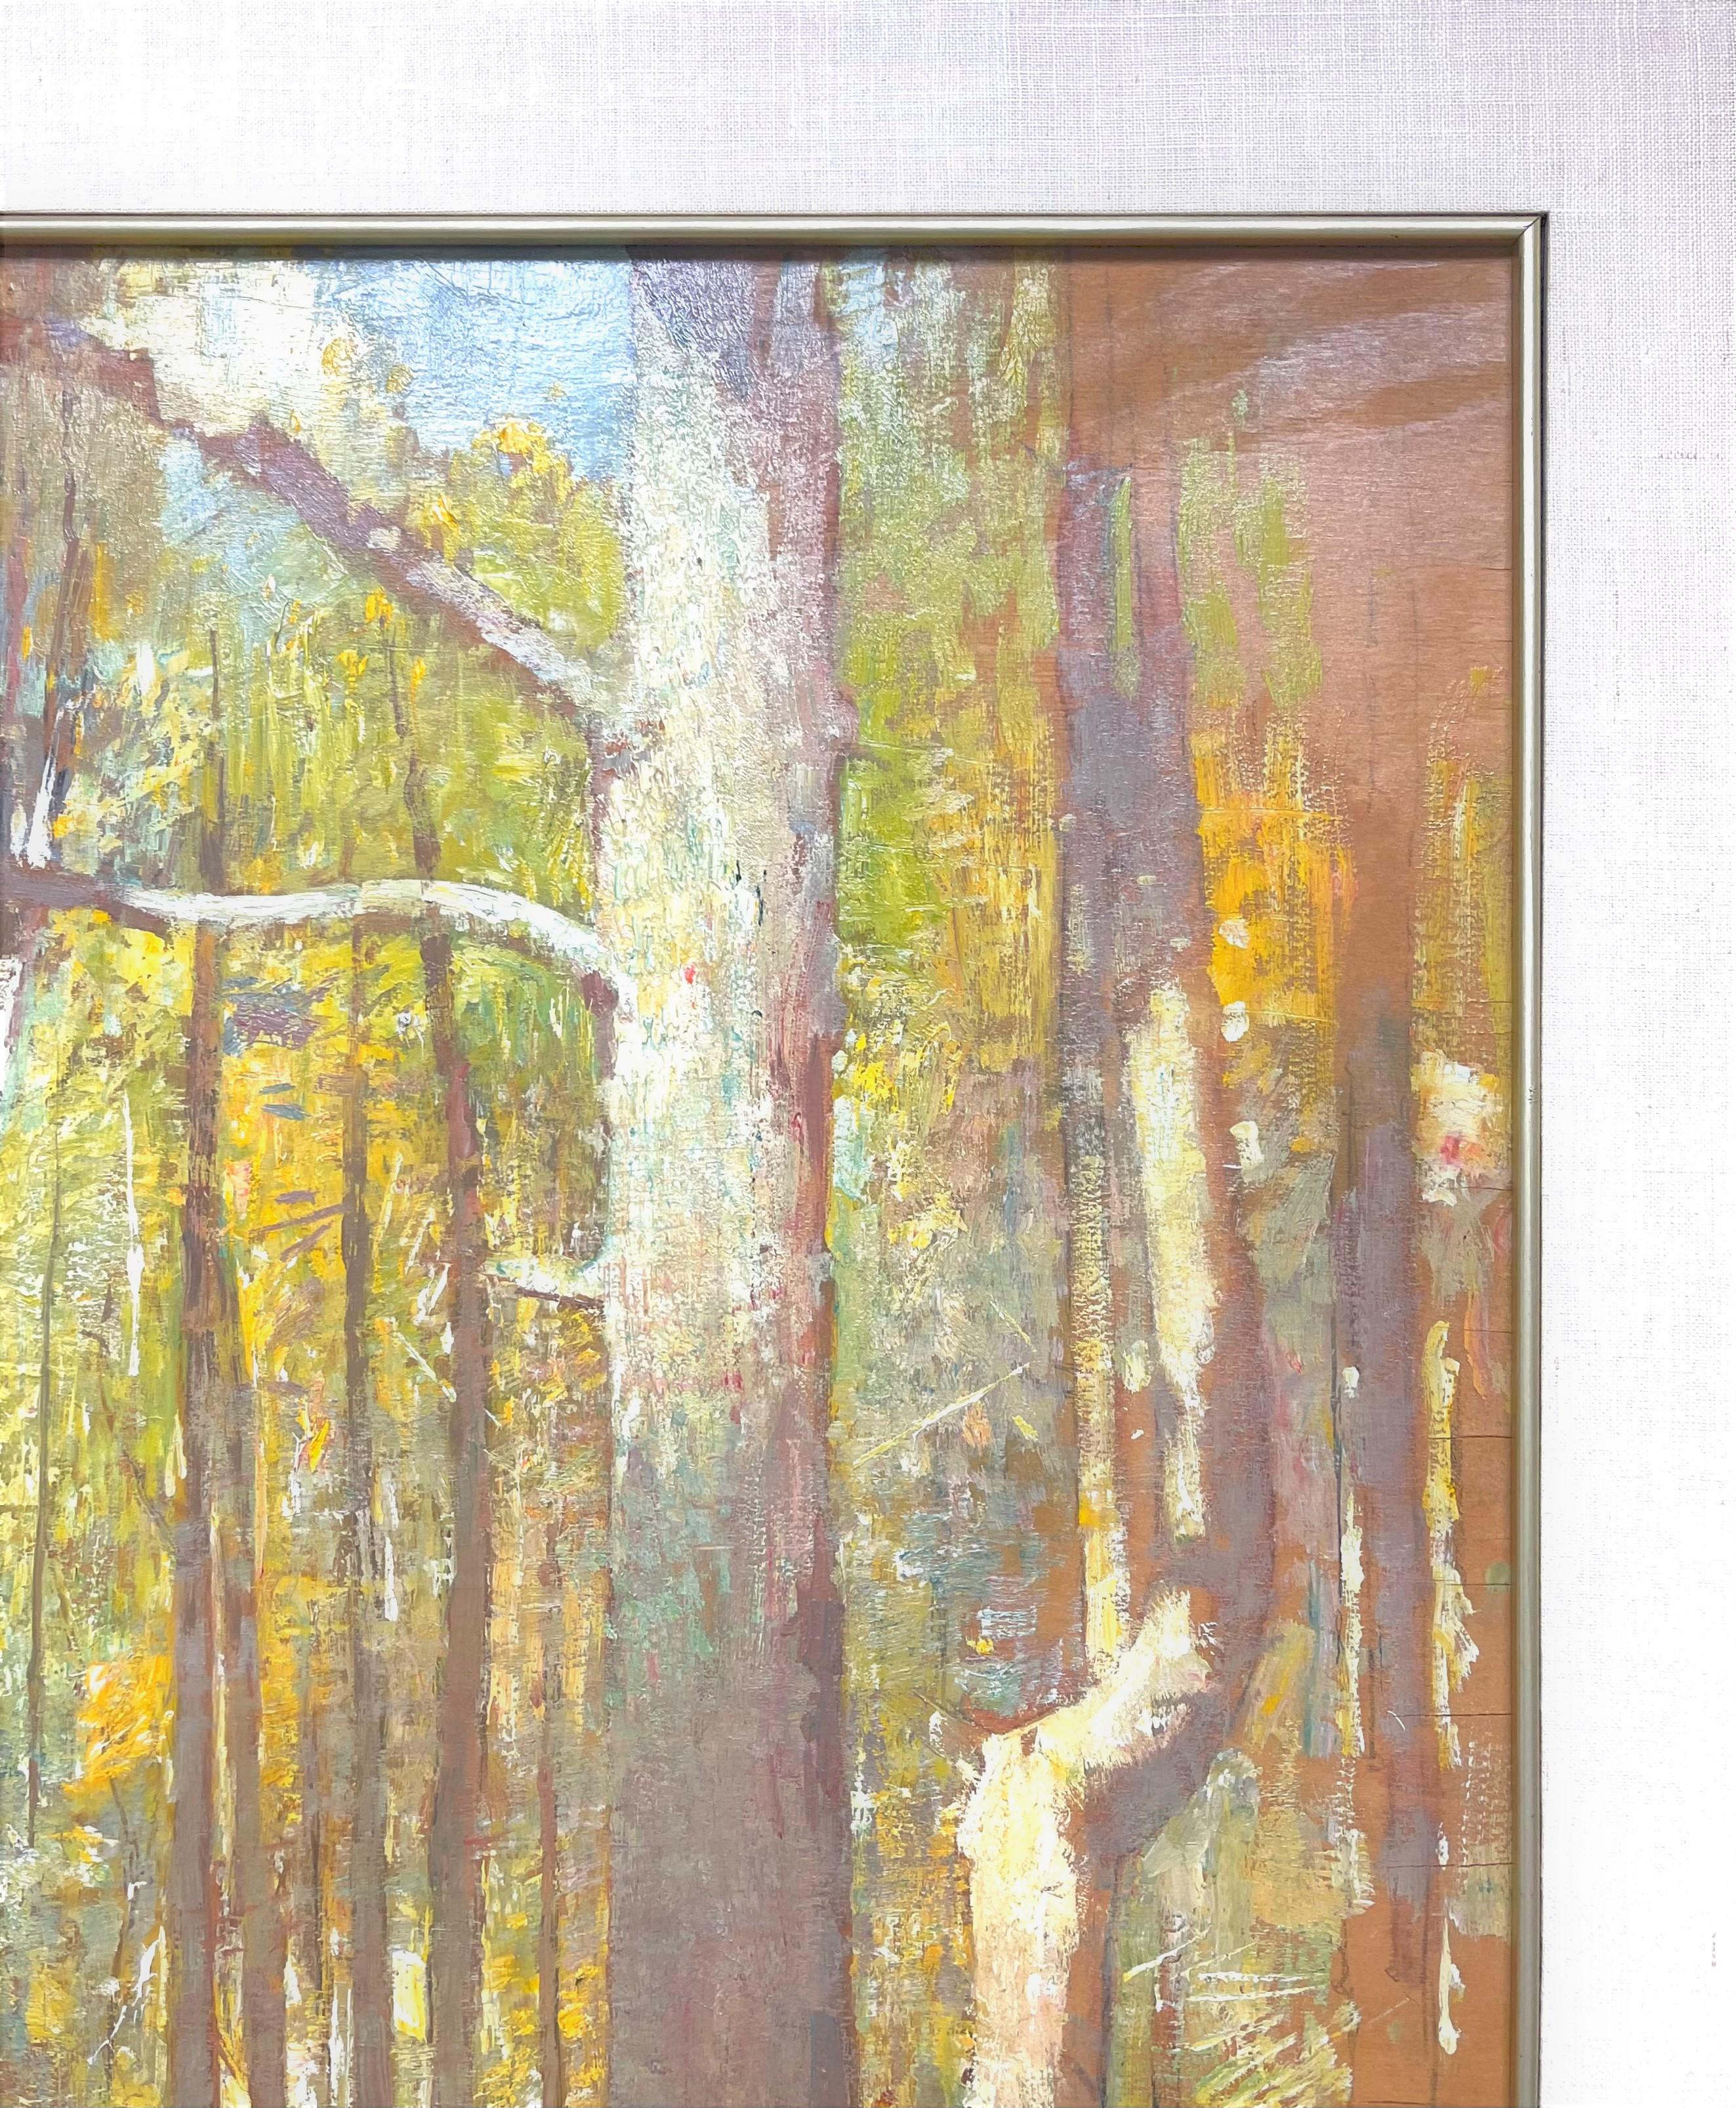 Yellow Landscape/Wood Interior/Birch Forest
3 different titles on 3 labels
DESCRIPTION
Yellow Landscape   oil /panel
bears Florence G. Carlsen Estate stamp on Brett Mitchell Collection label
image 20 x 24
CONDITION
Framed 34 1/2 x 30 1/2 
Minor